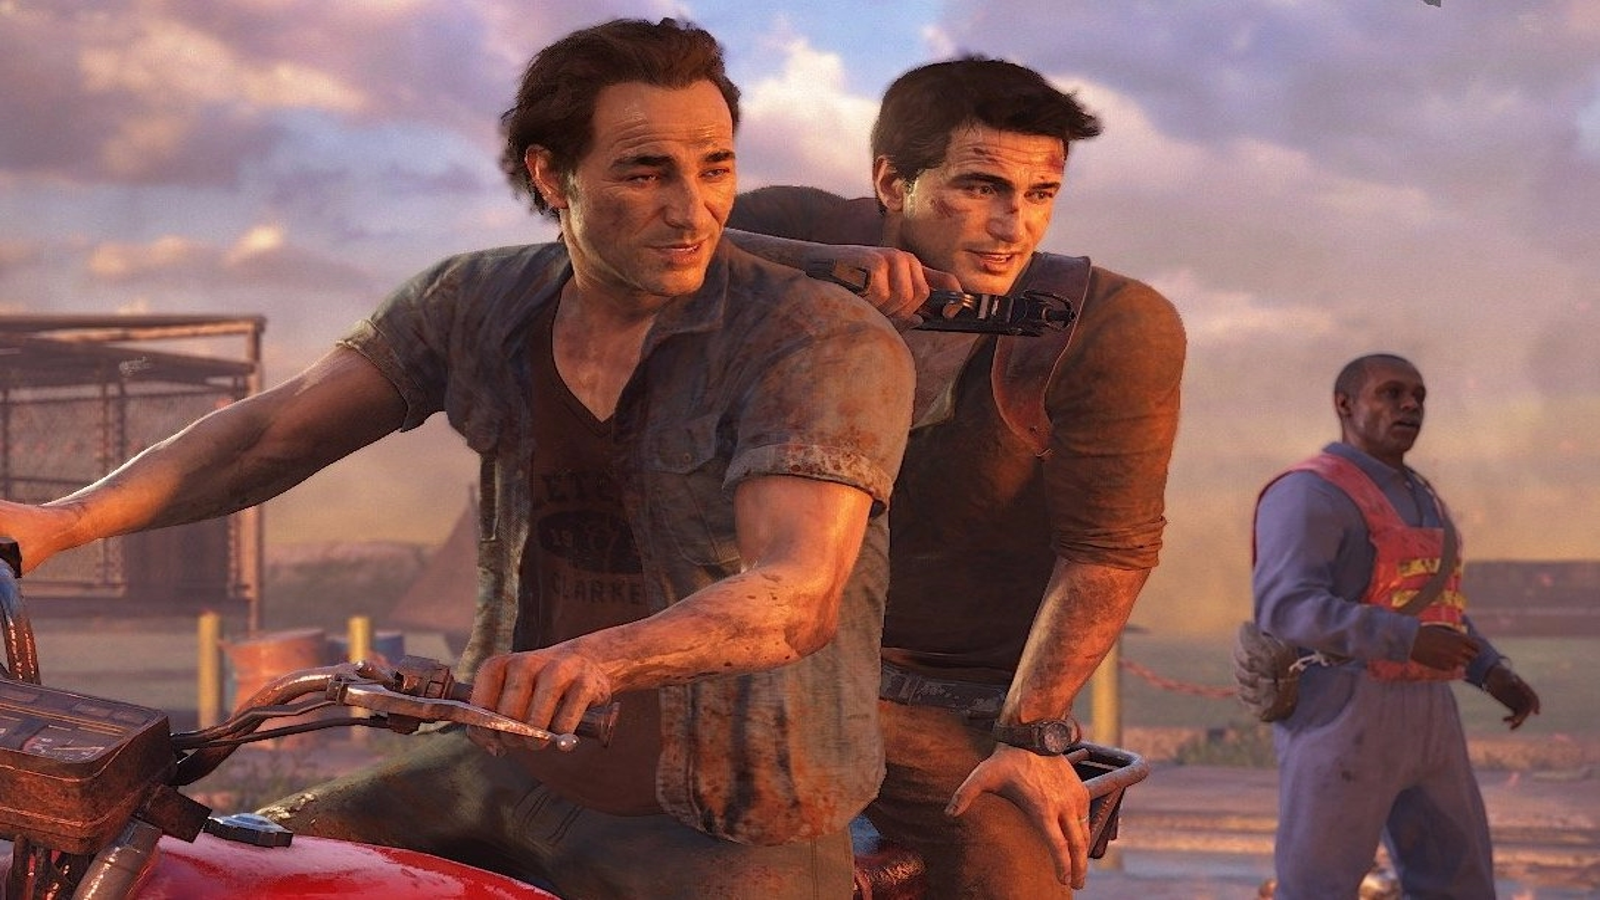 Uncharted 4 Delayed Until 2016